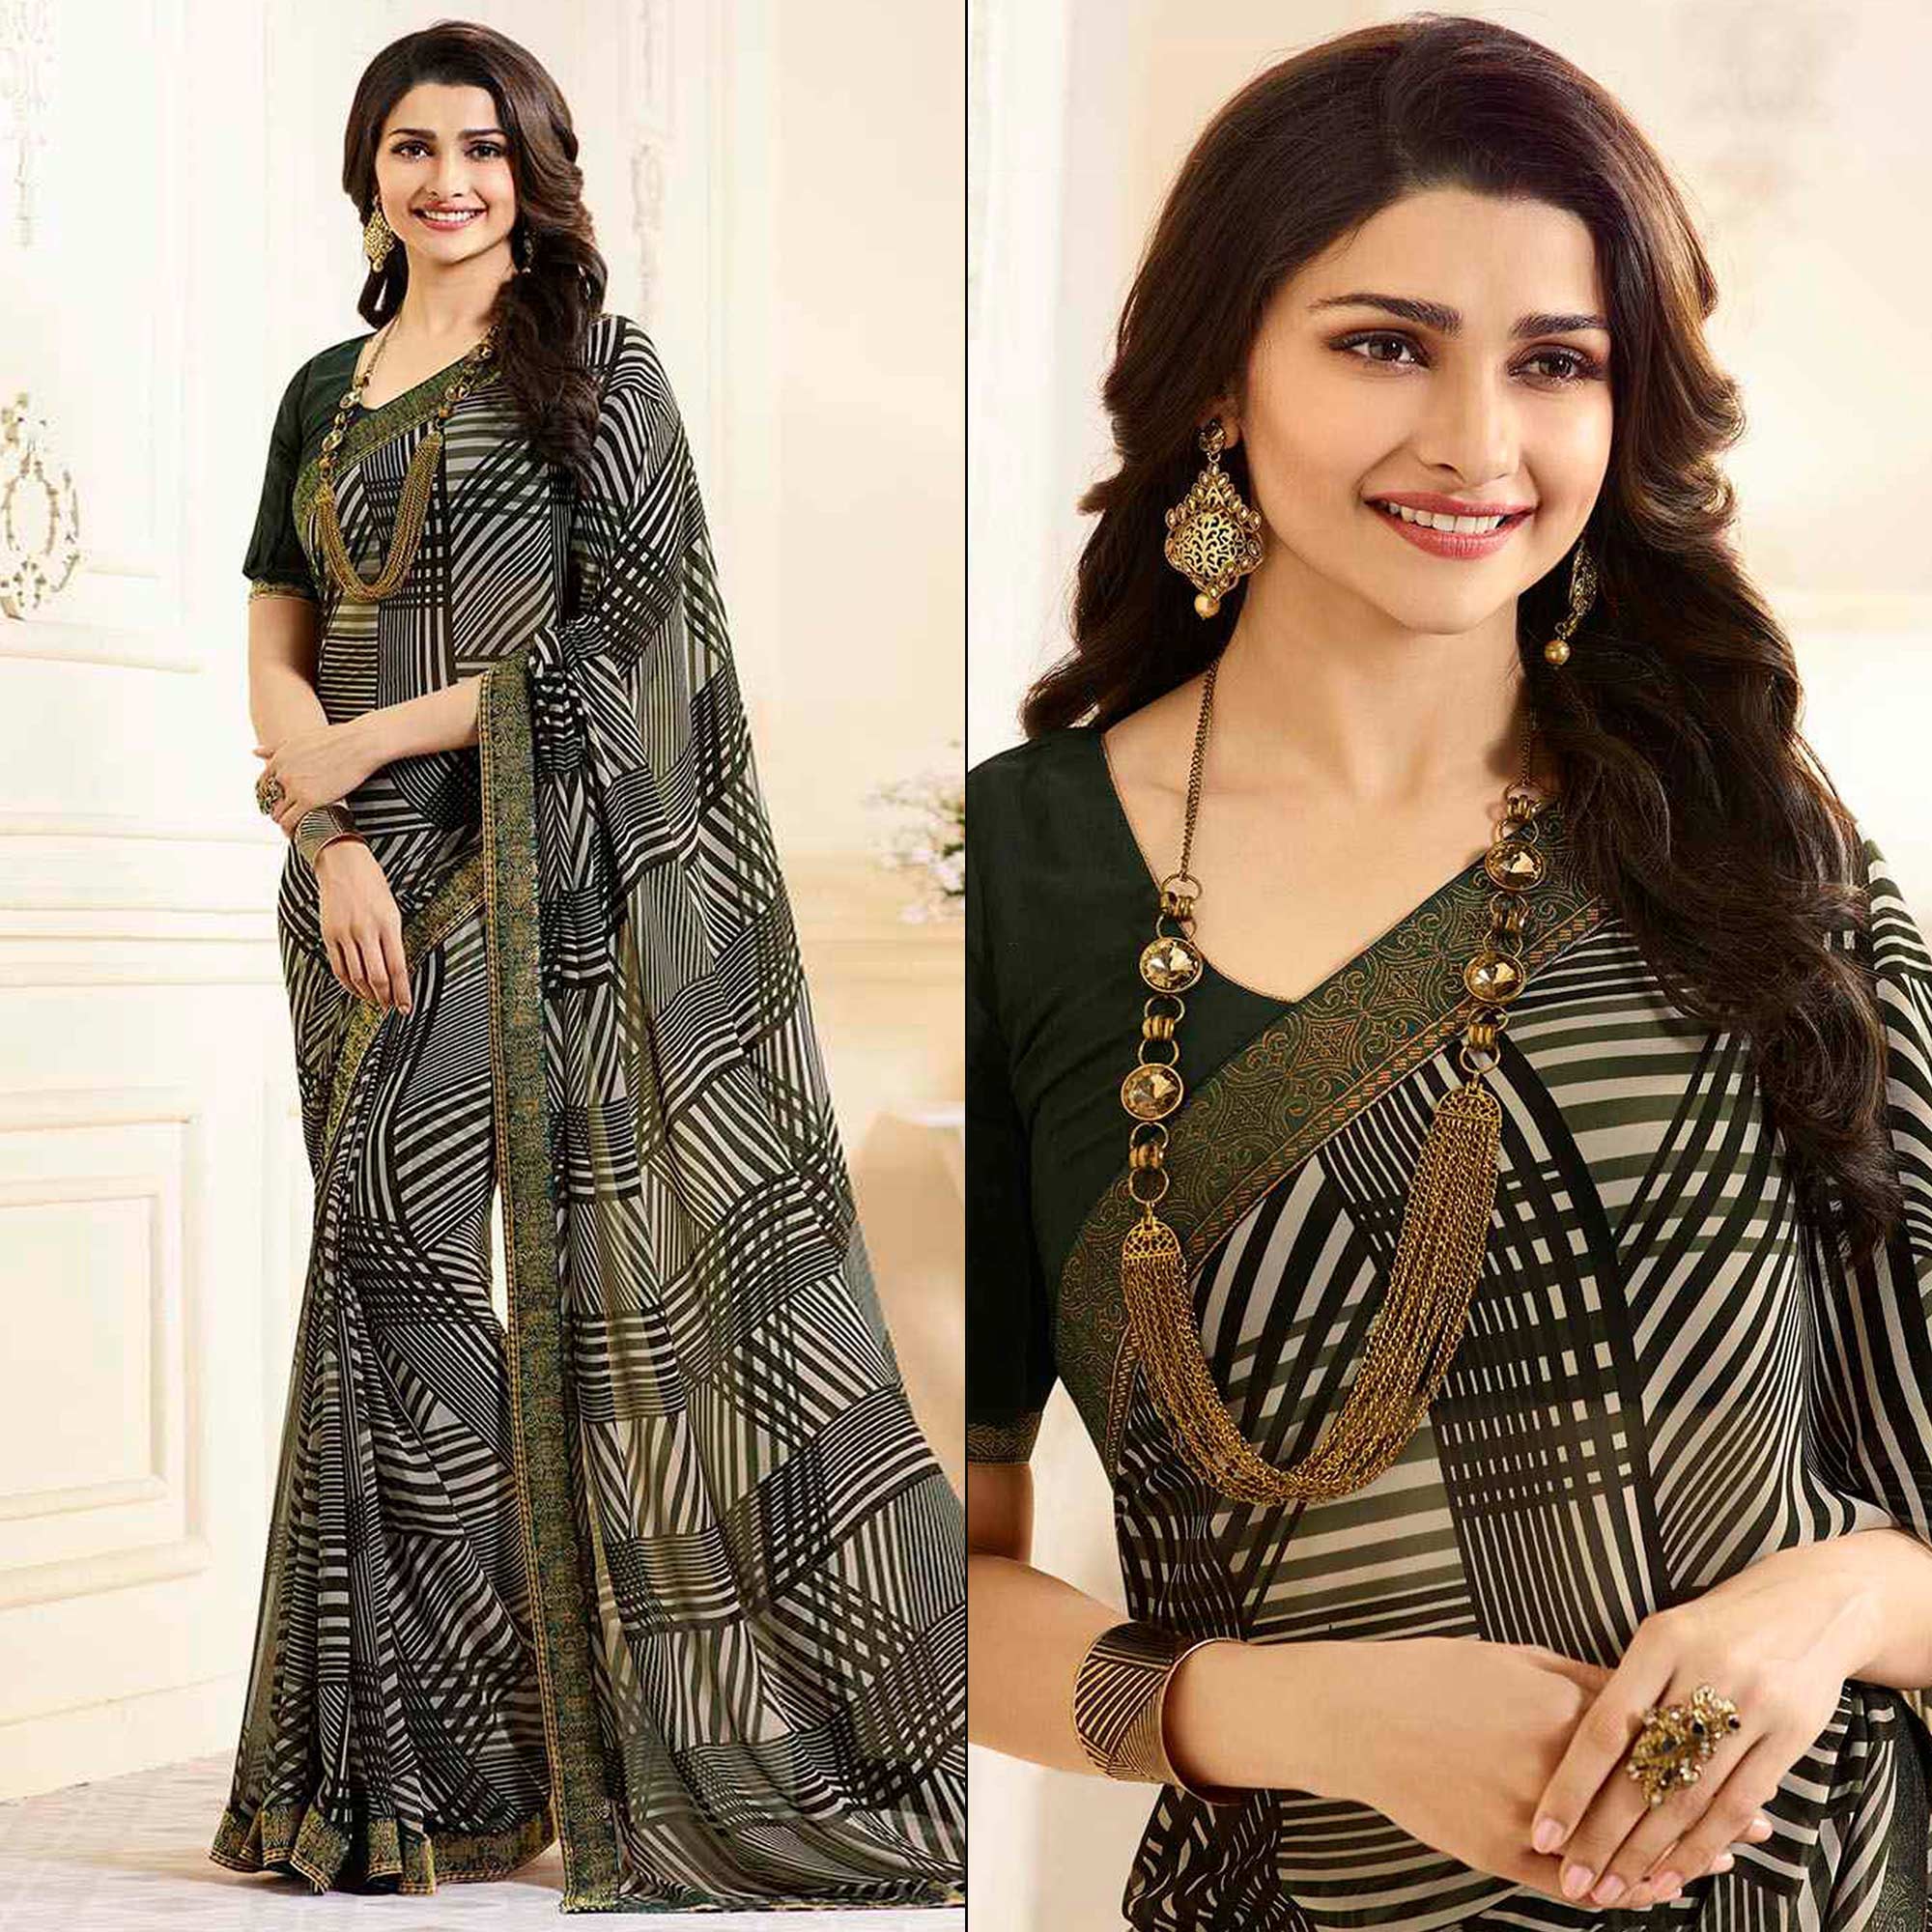 Mehandi Green Printed Georgette Saree With Lace Border